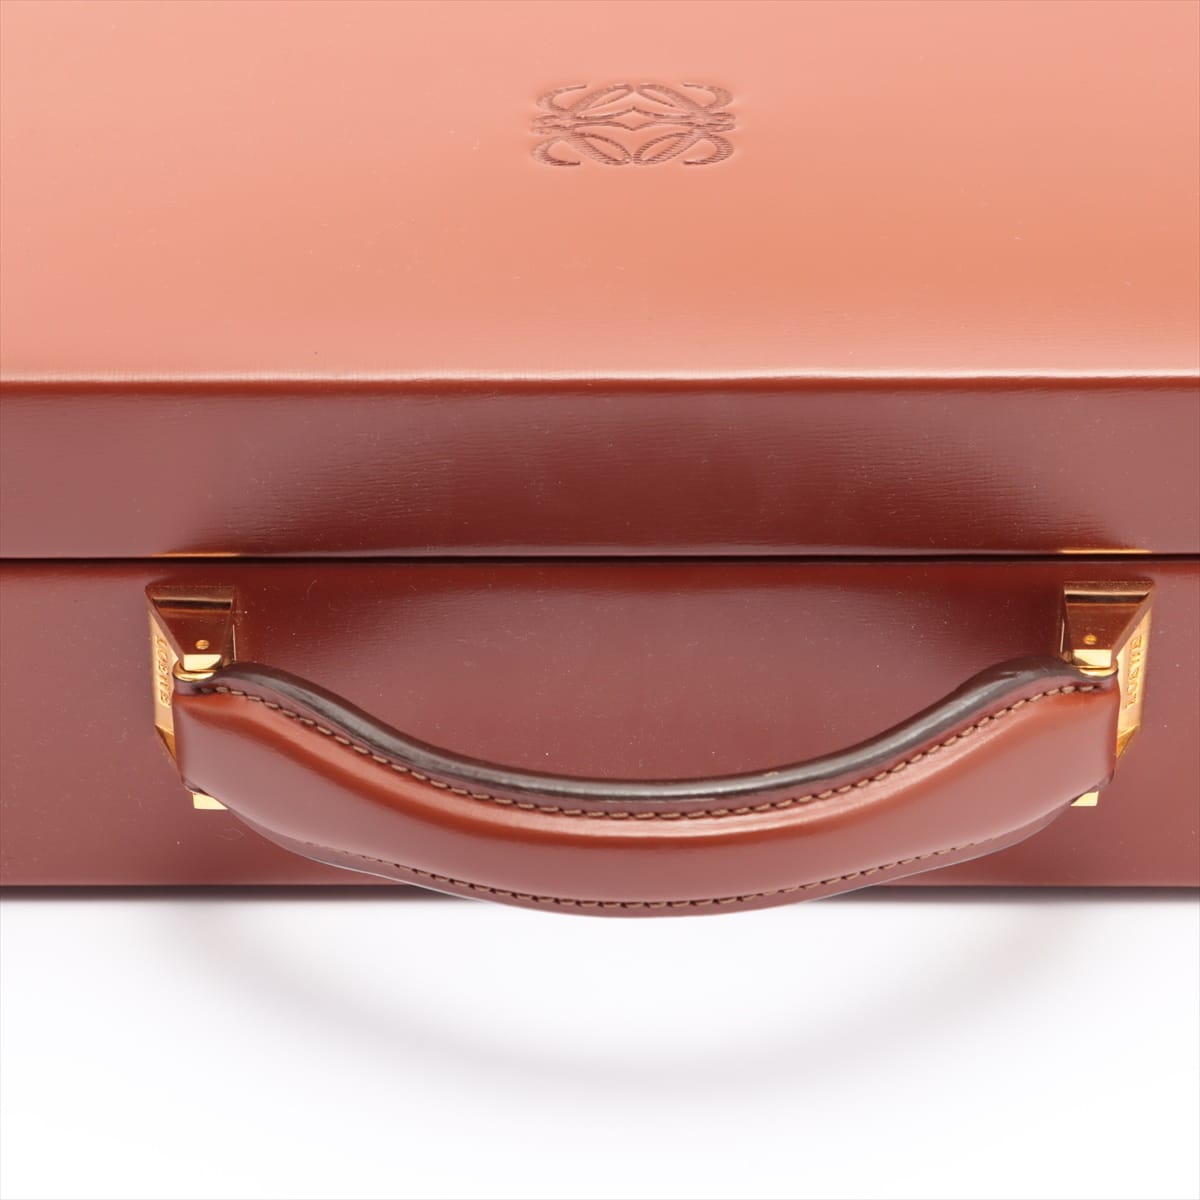 Loewe Anagram Leather Attache case Brown Setting number; left and right 000